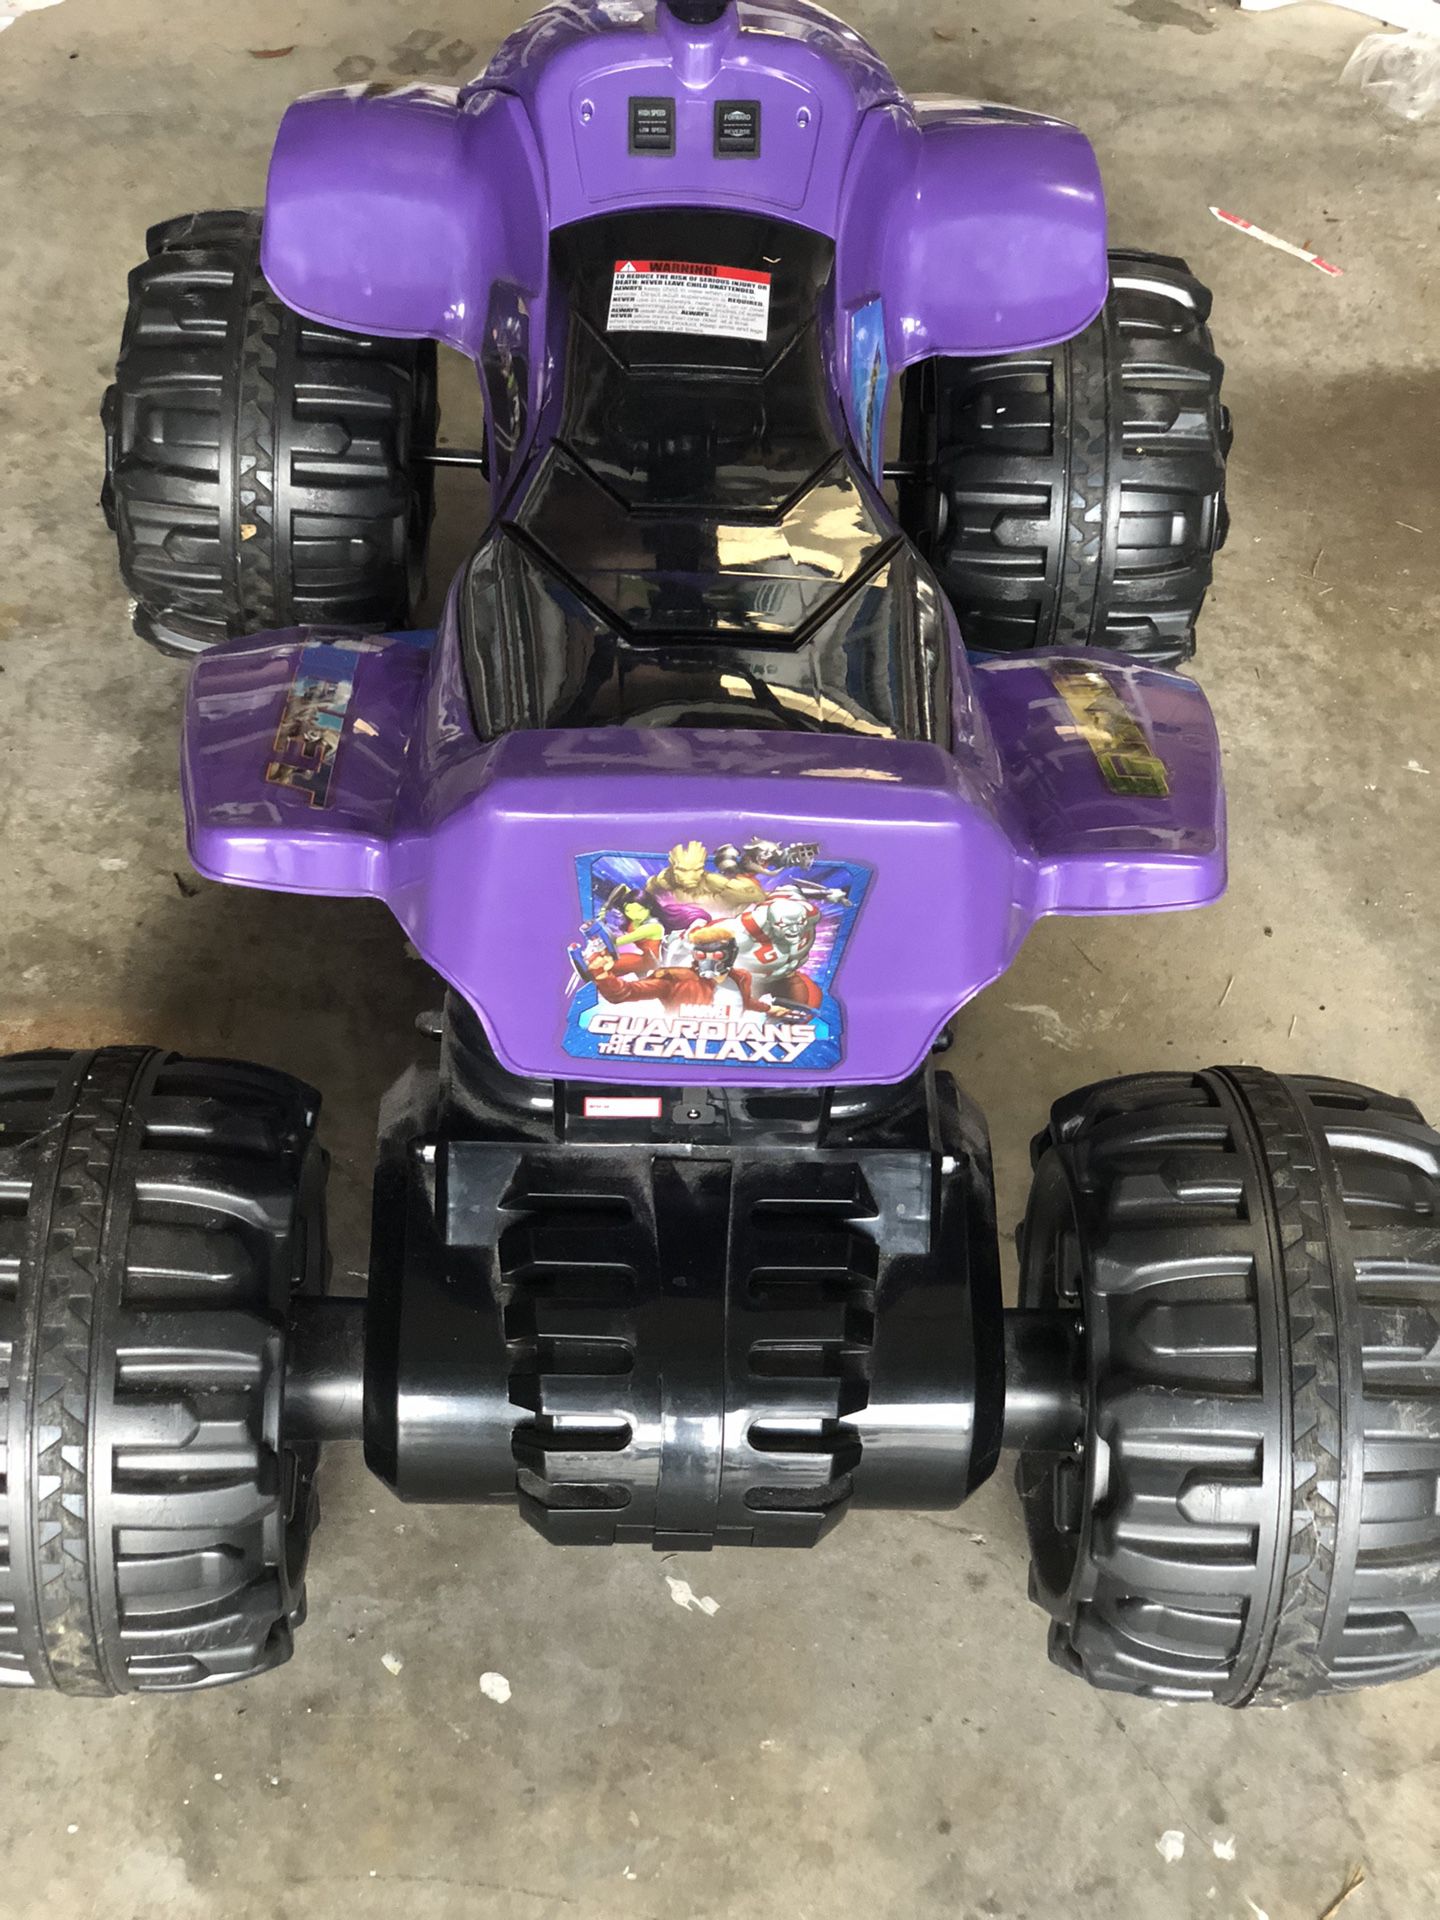 Battery operated kids Dune racer 